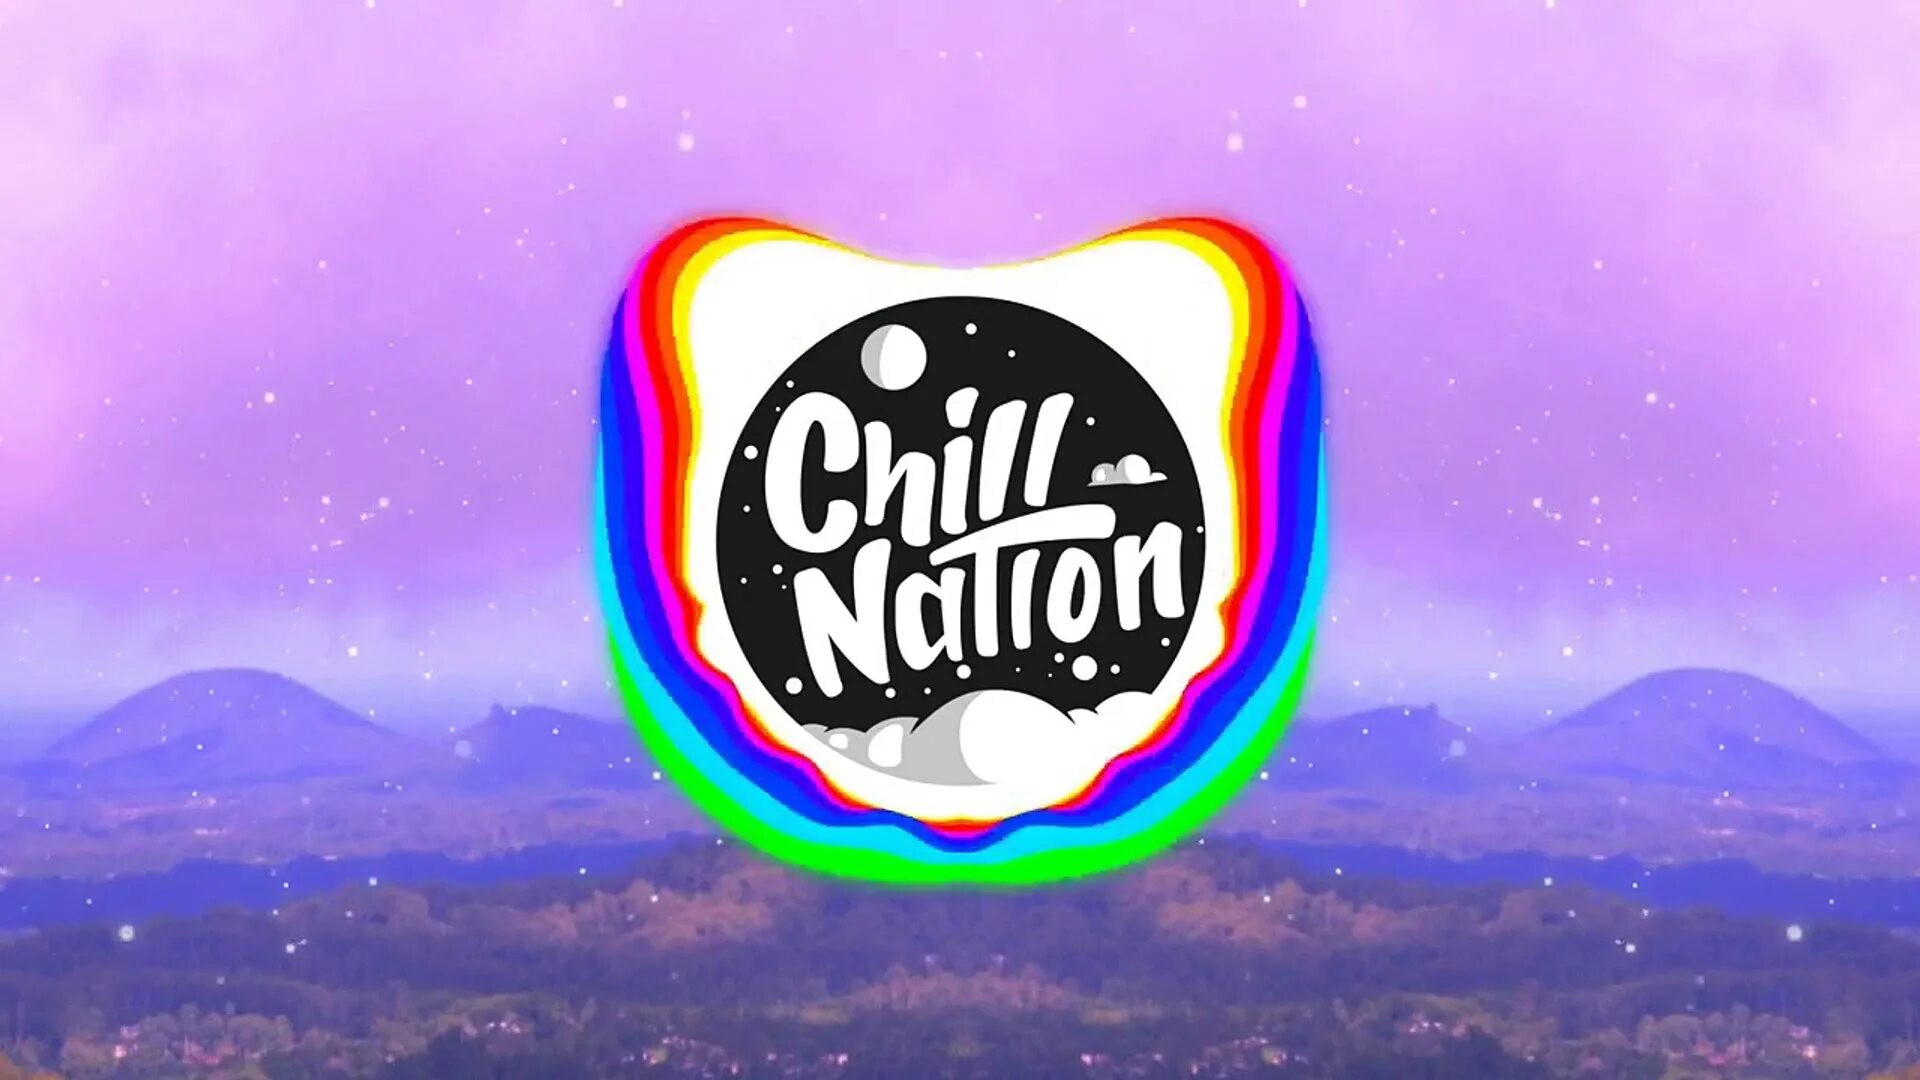 Chill Nation. Chill Nation logo. Chill Nation Wallpapers. The Chill. Remix mp 3